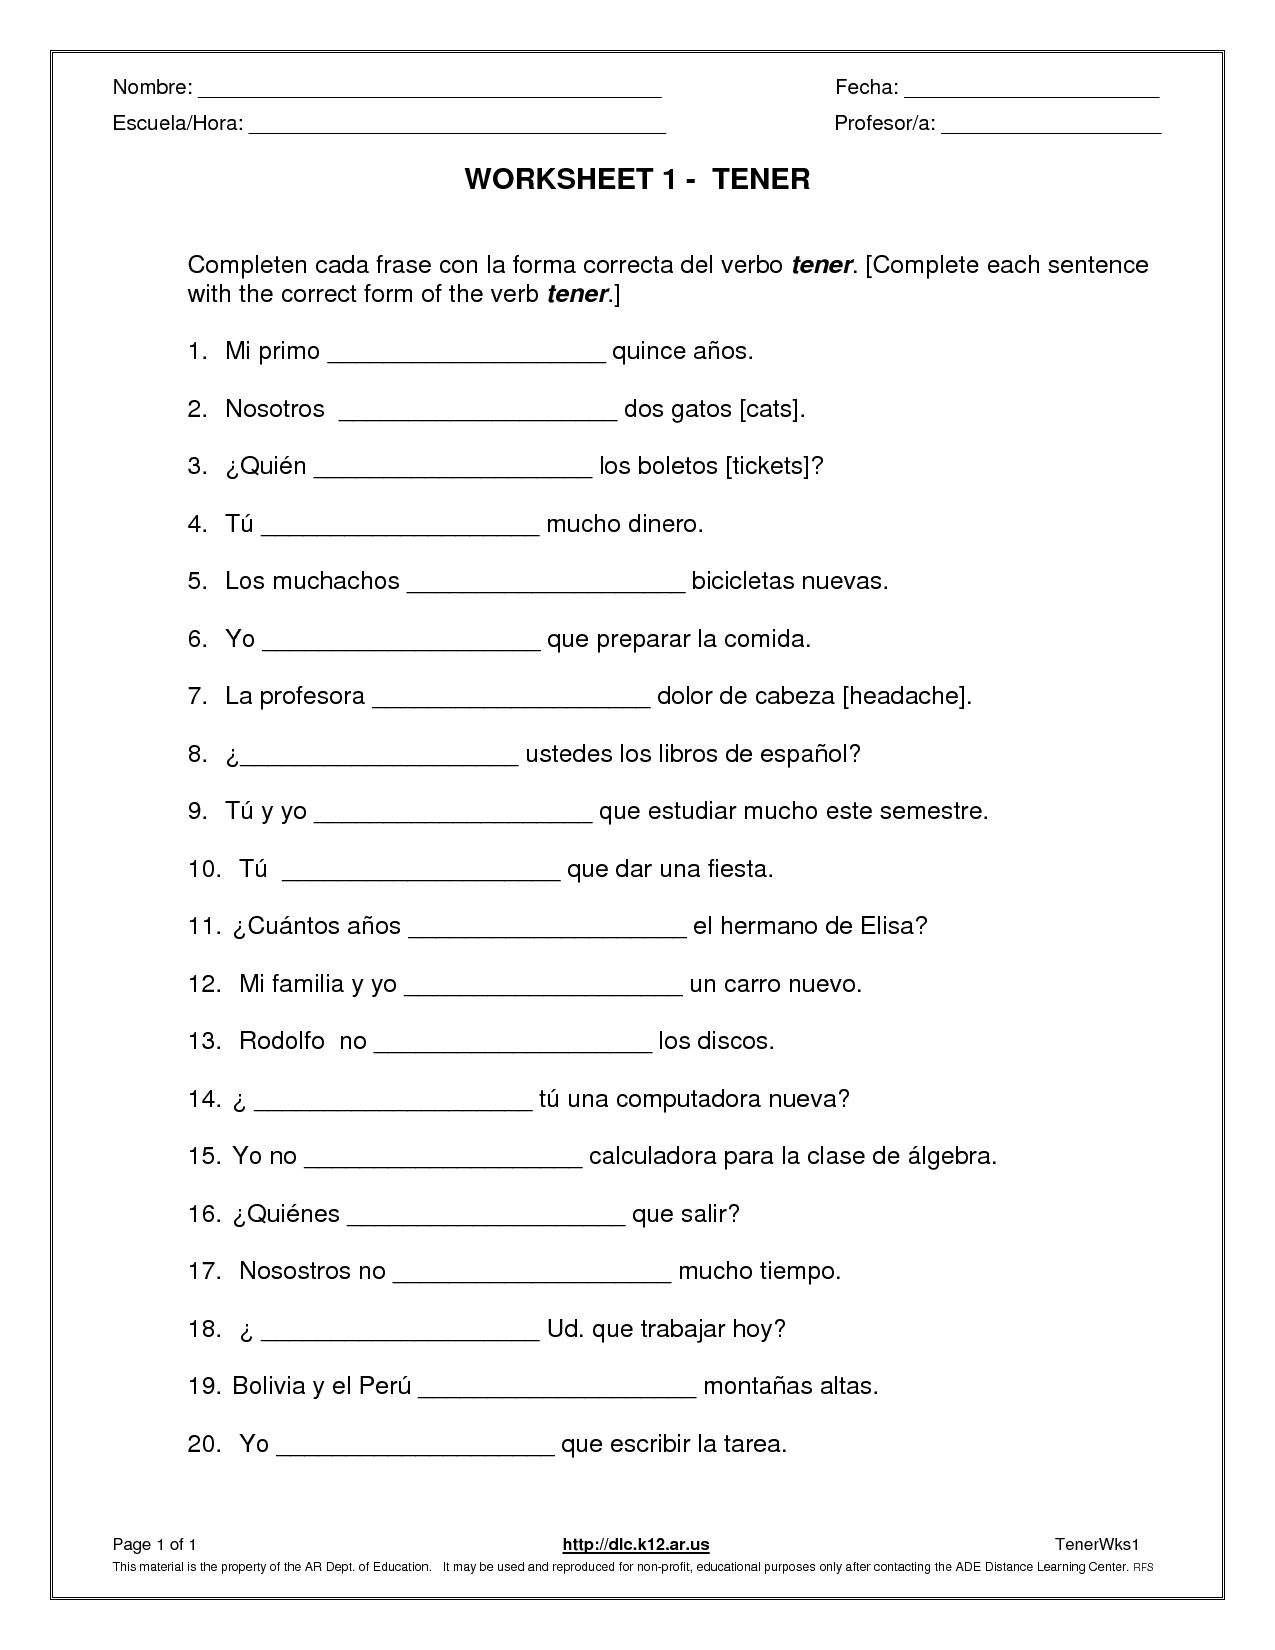 Agreement Of Adjectives Spanish Worksheet Answers 108625 For Agreement Of Adjectives Spanish Worksheet Answers